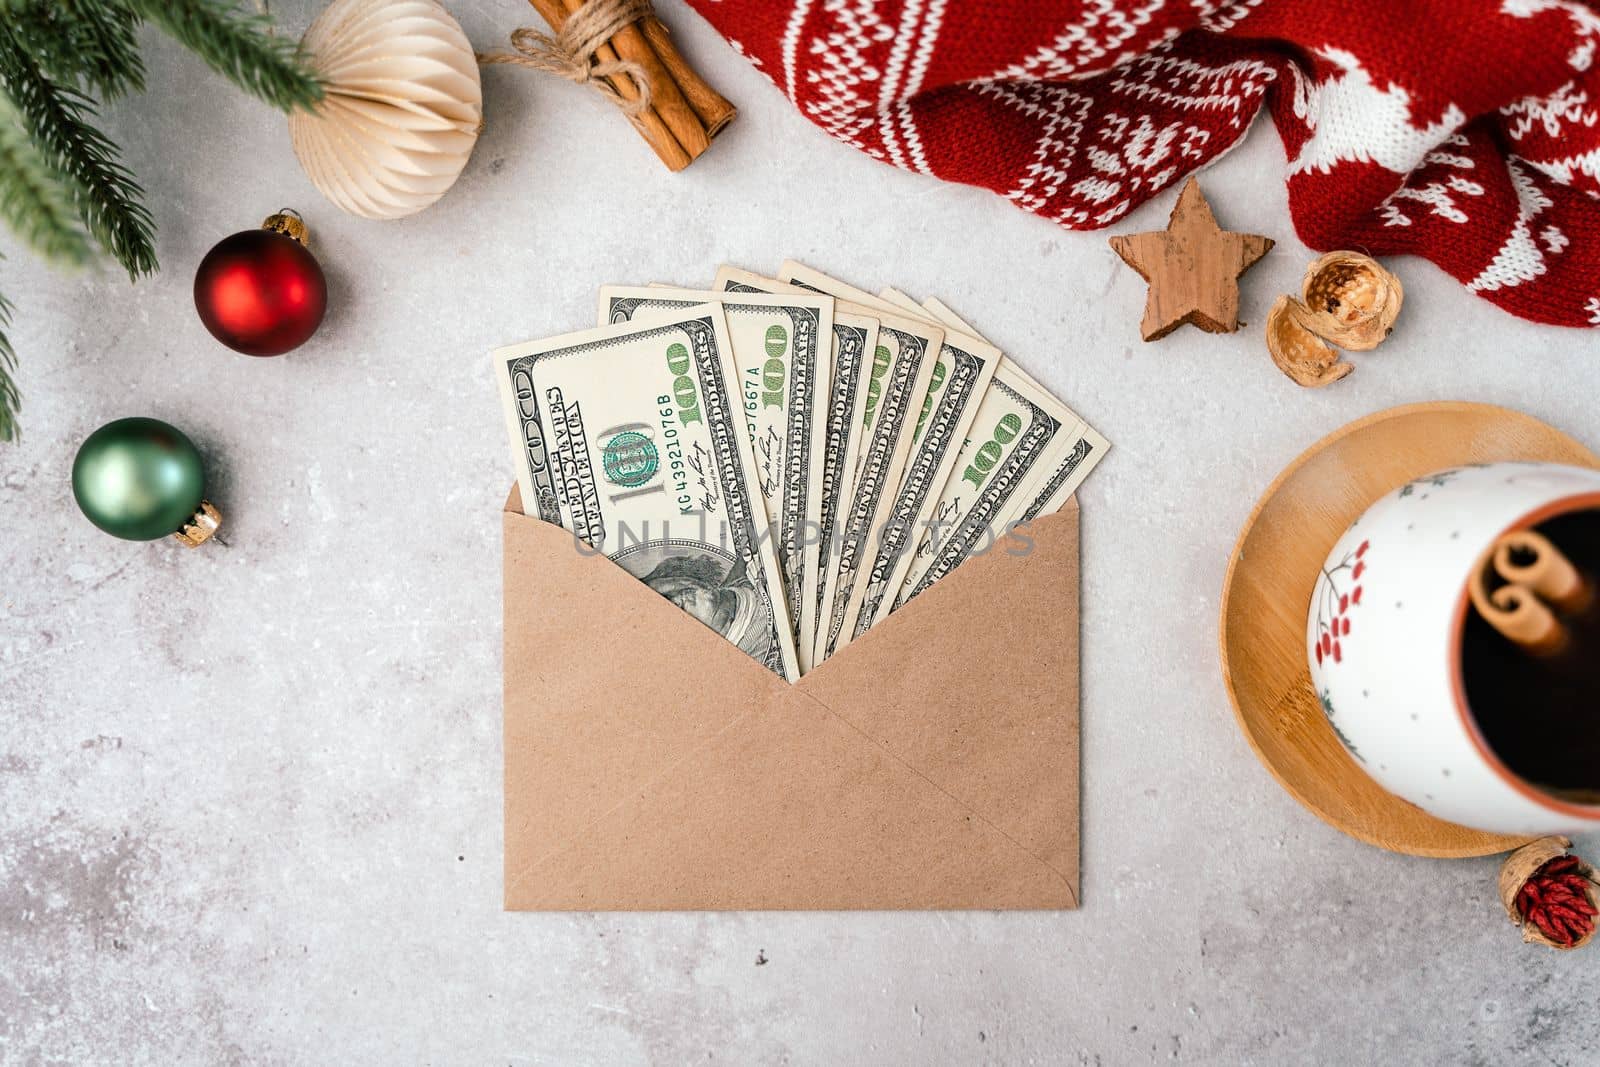 Paper envelope with money dollars bills for Christmas gifts. Top view counting budget for Christmas. Doing budget, estimate money balance for shopping spree. Flat lay with coffee and Christmas decor.